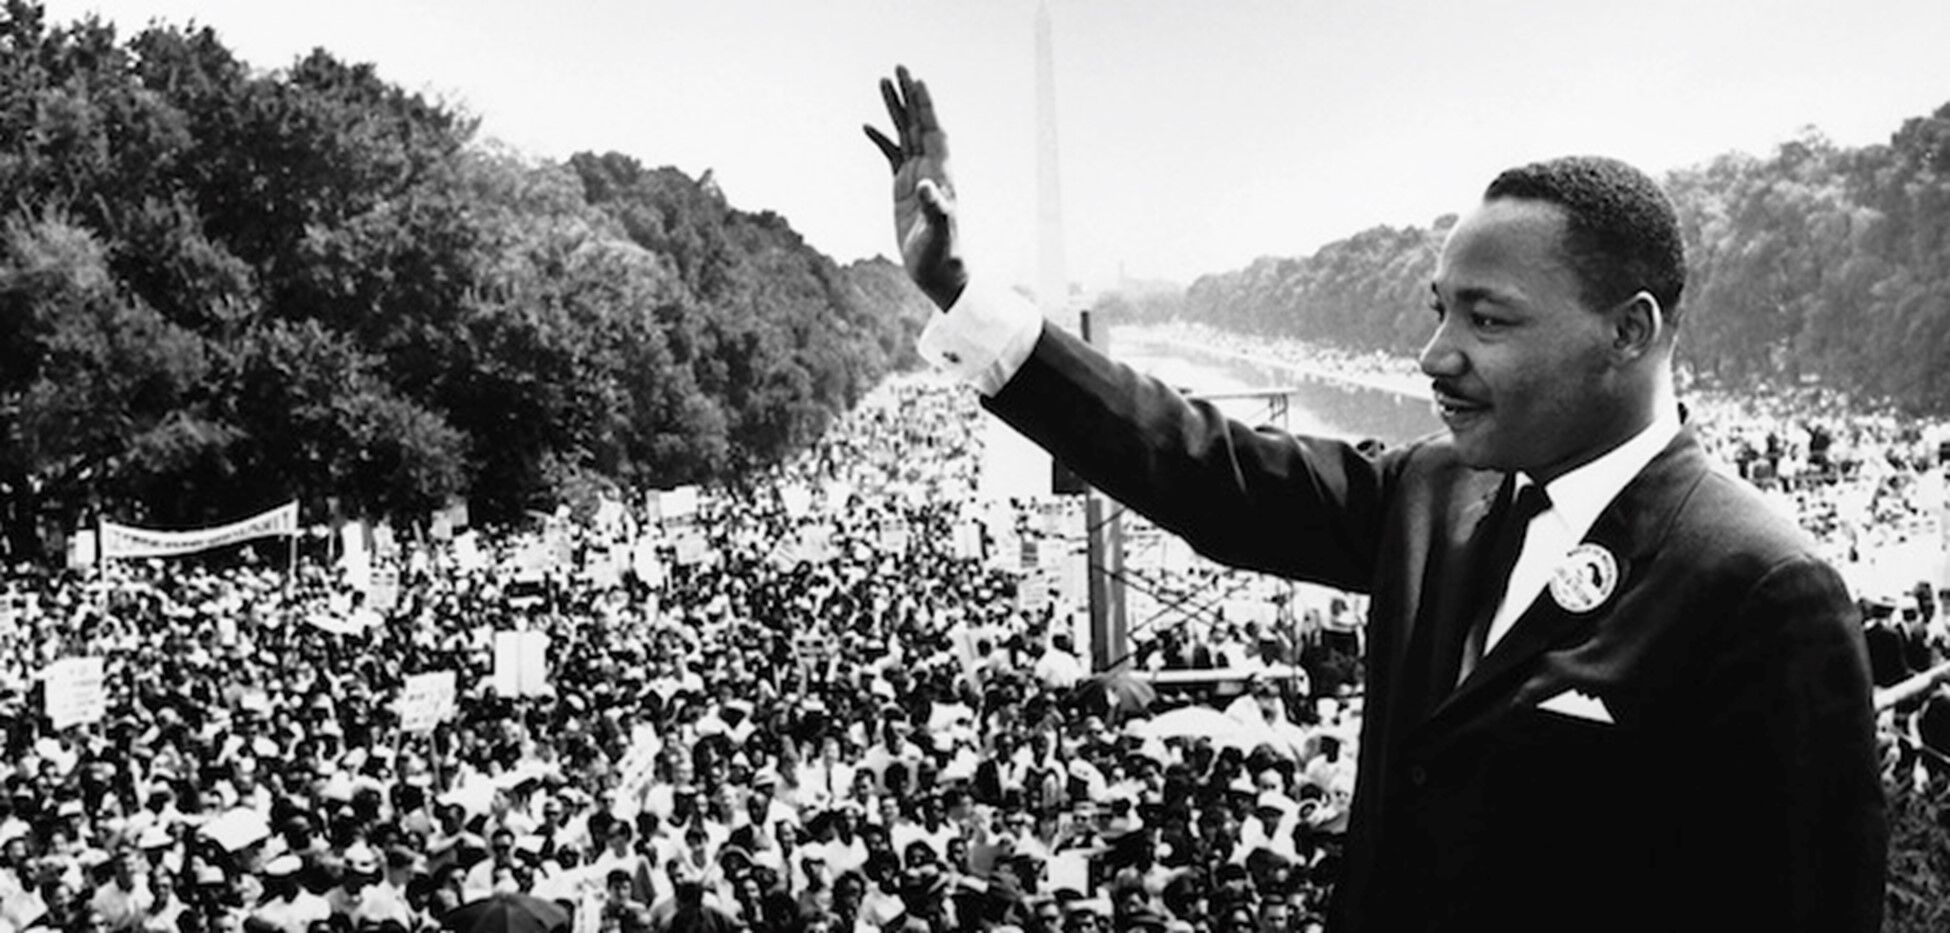 An Invitation to Recommit to Change: Honoring the Legacy of Dr. Martin Luther King